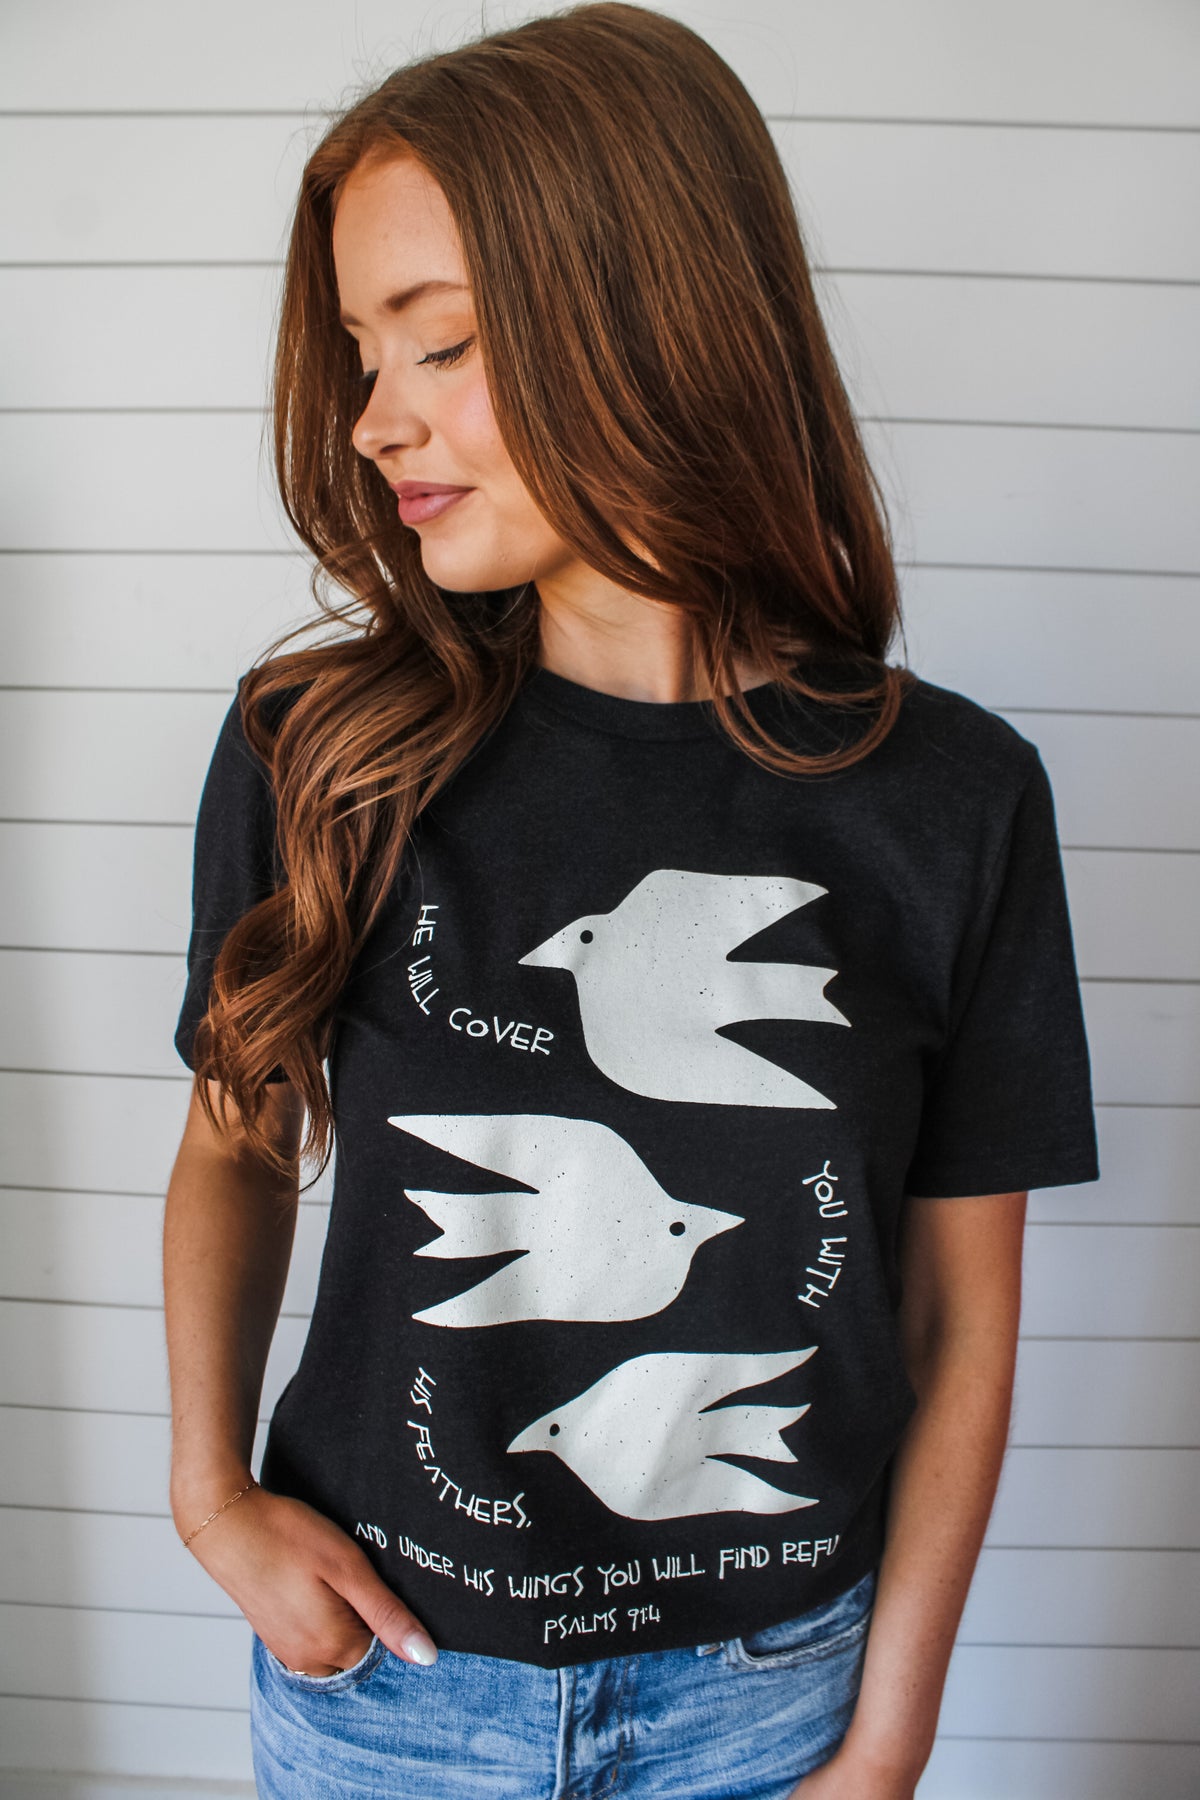 Under His Wings You Will Find Refuge Graphic Tee